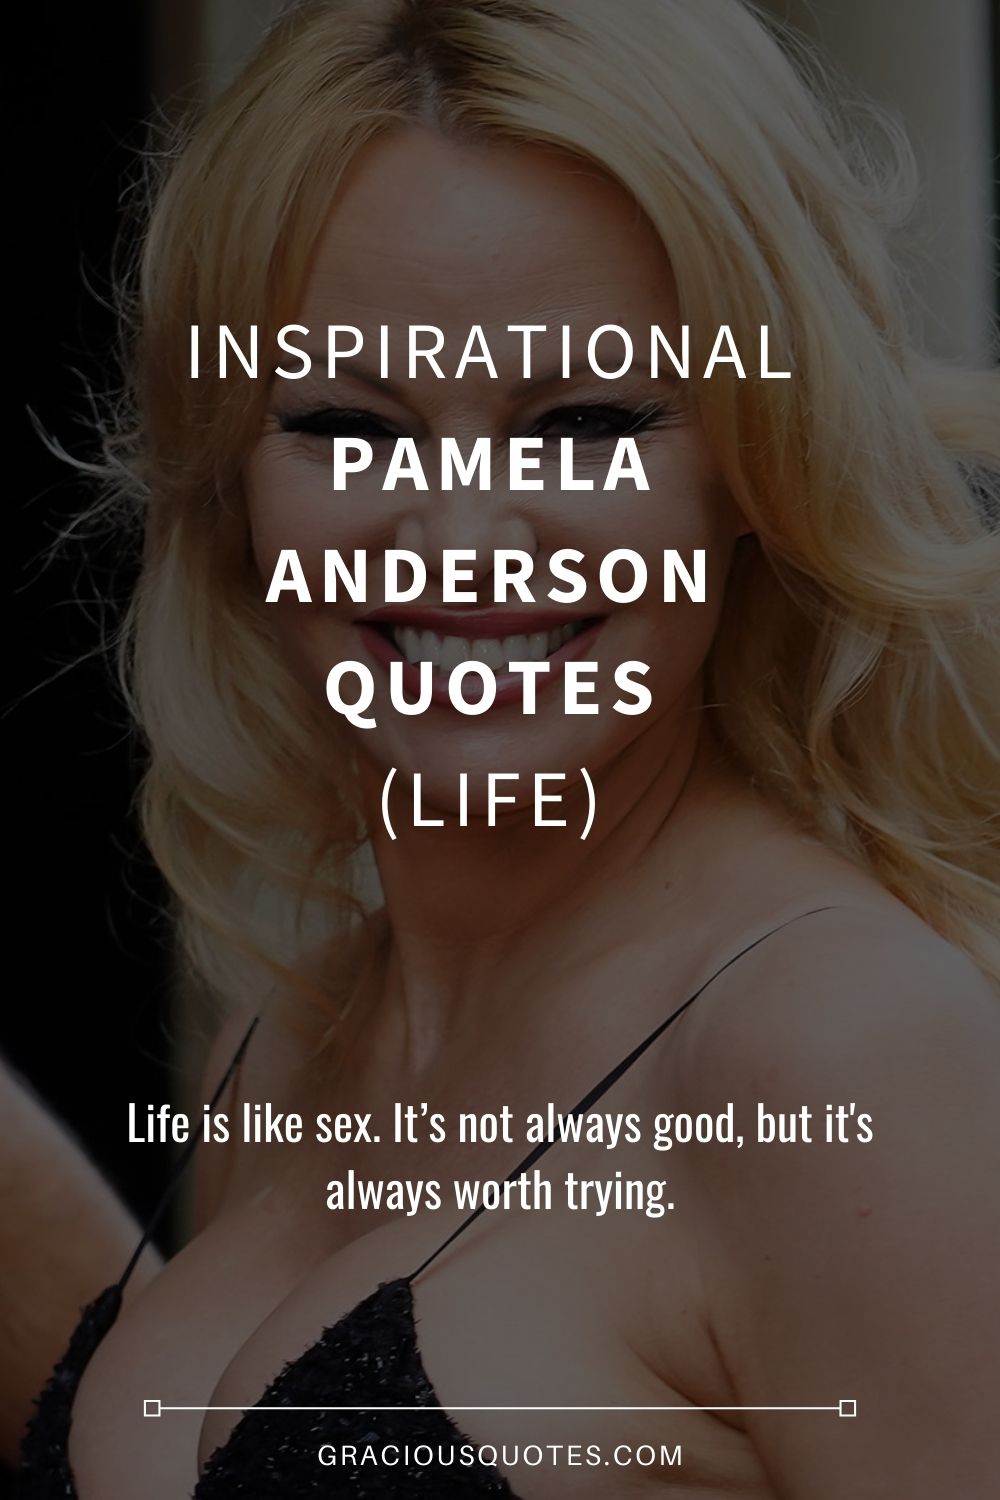 Inspirational Pamela Anderson Quotes (LIFE) - Gracious Quotes